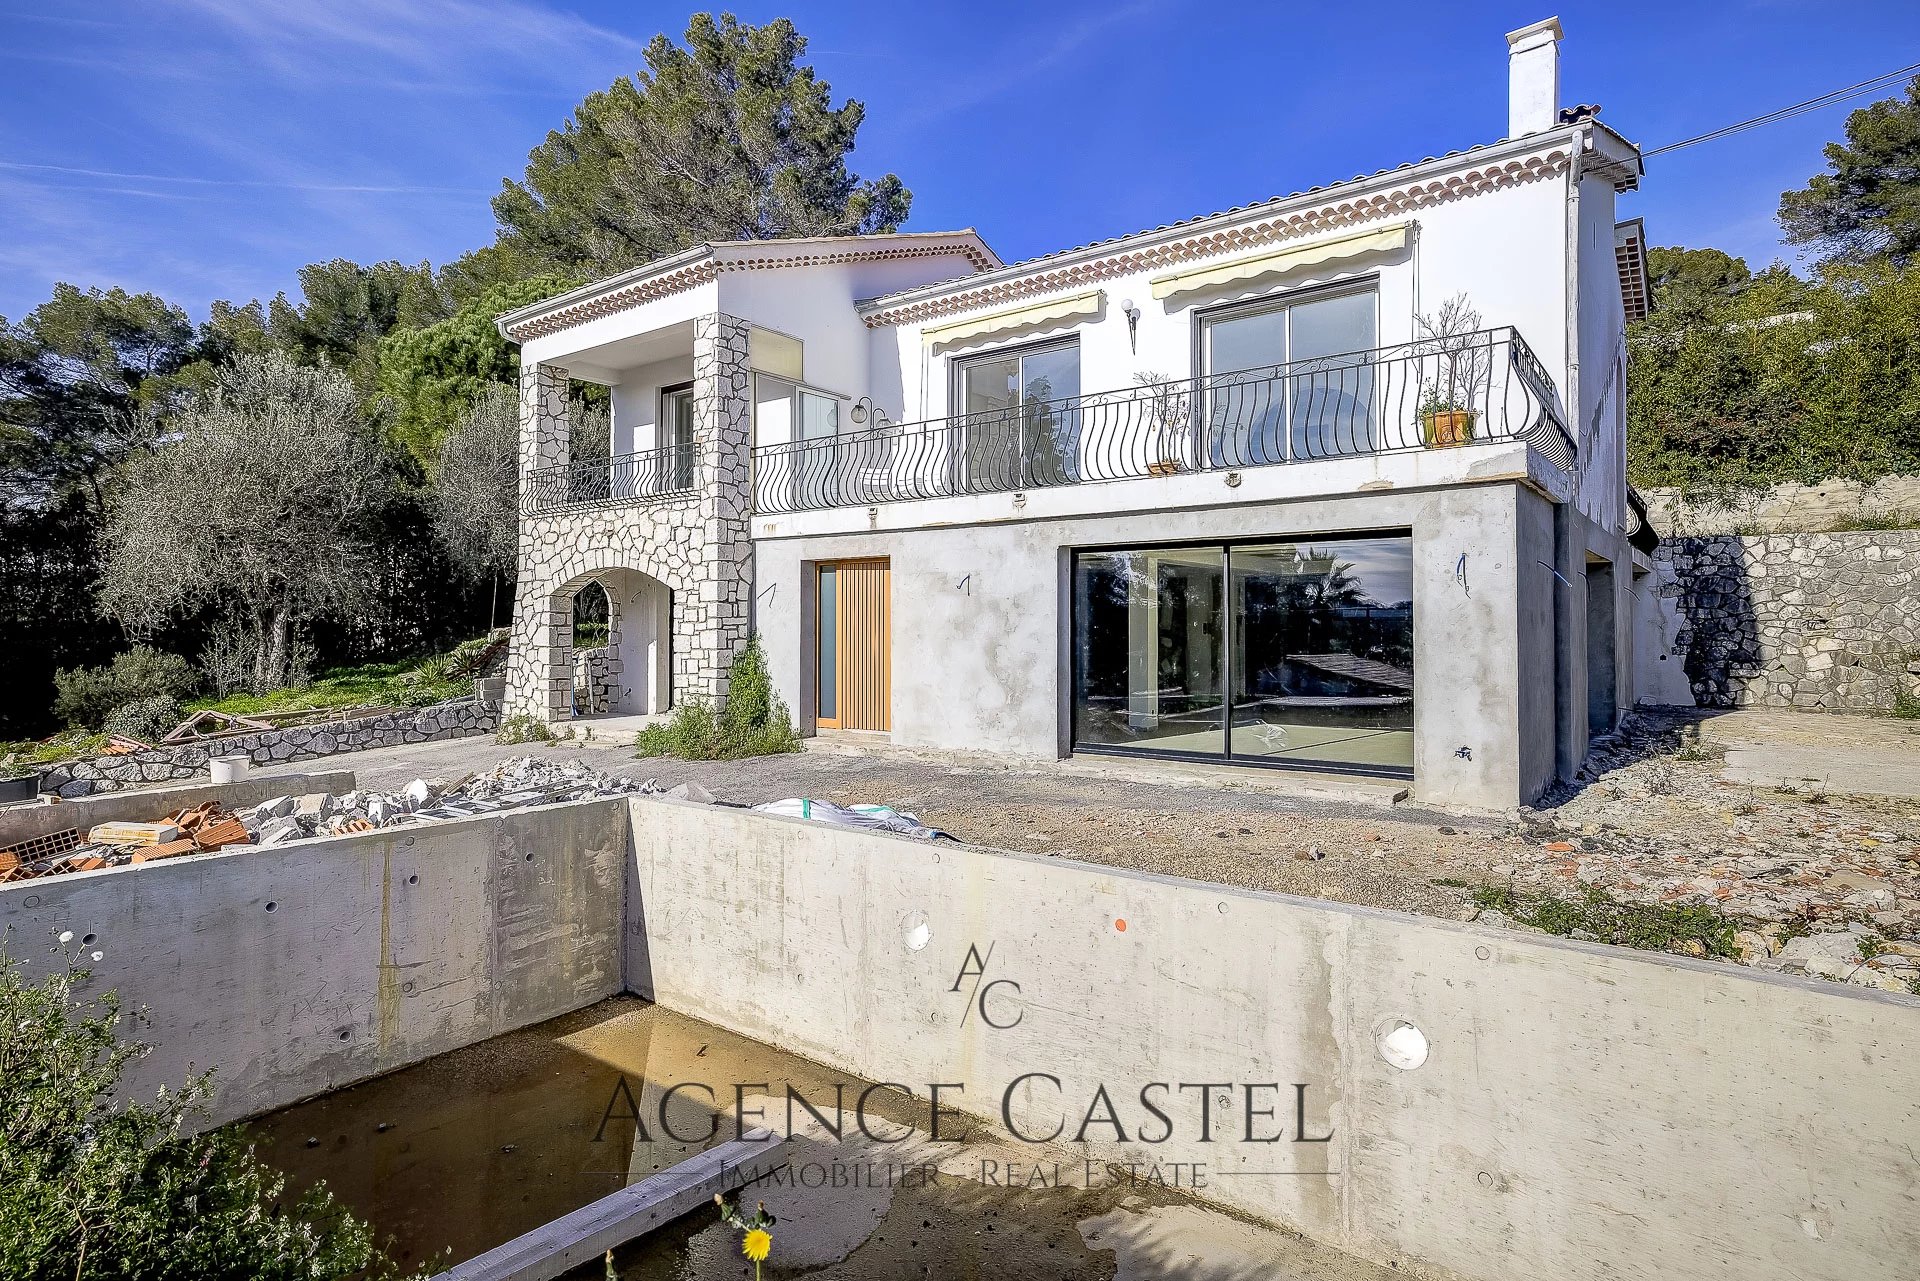 MOUGINS - 4 BEDROOM VILLA WITH SWIMMING POOL AND GARDEN